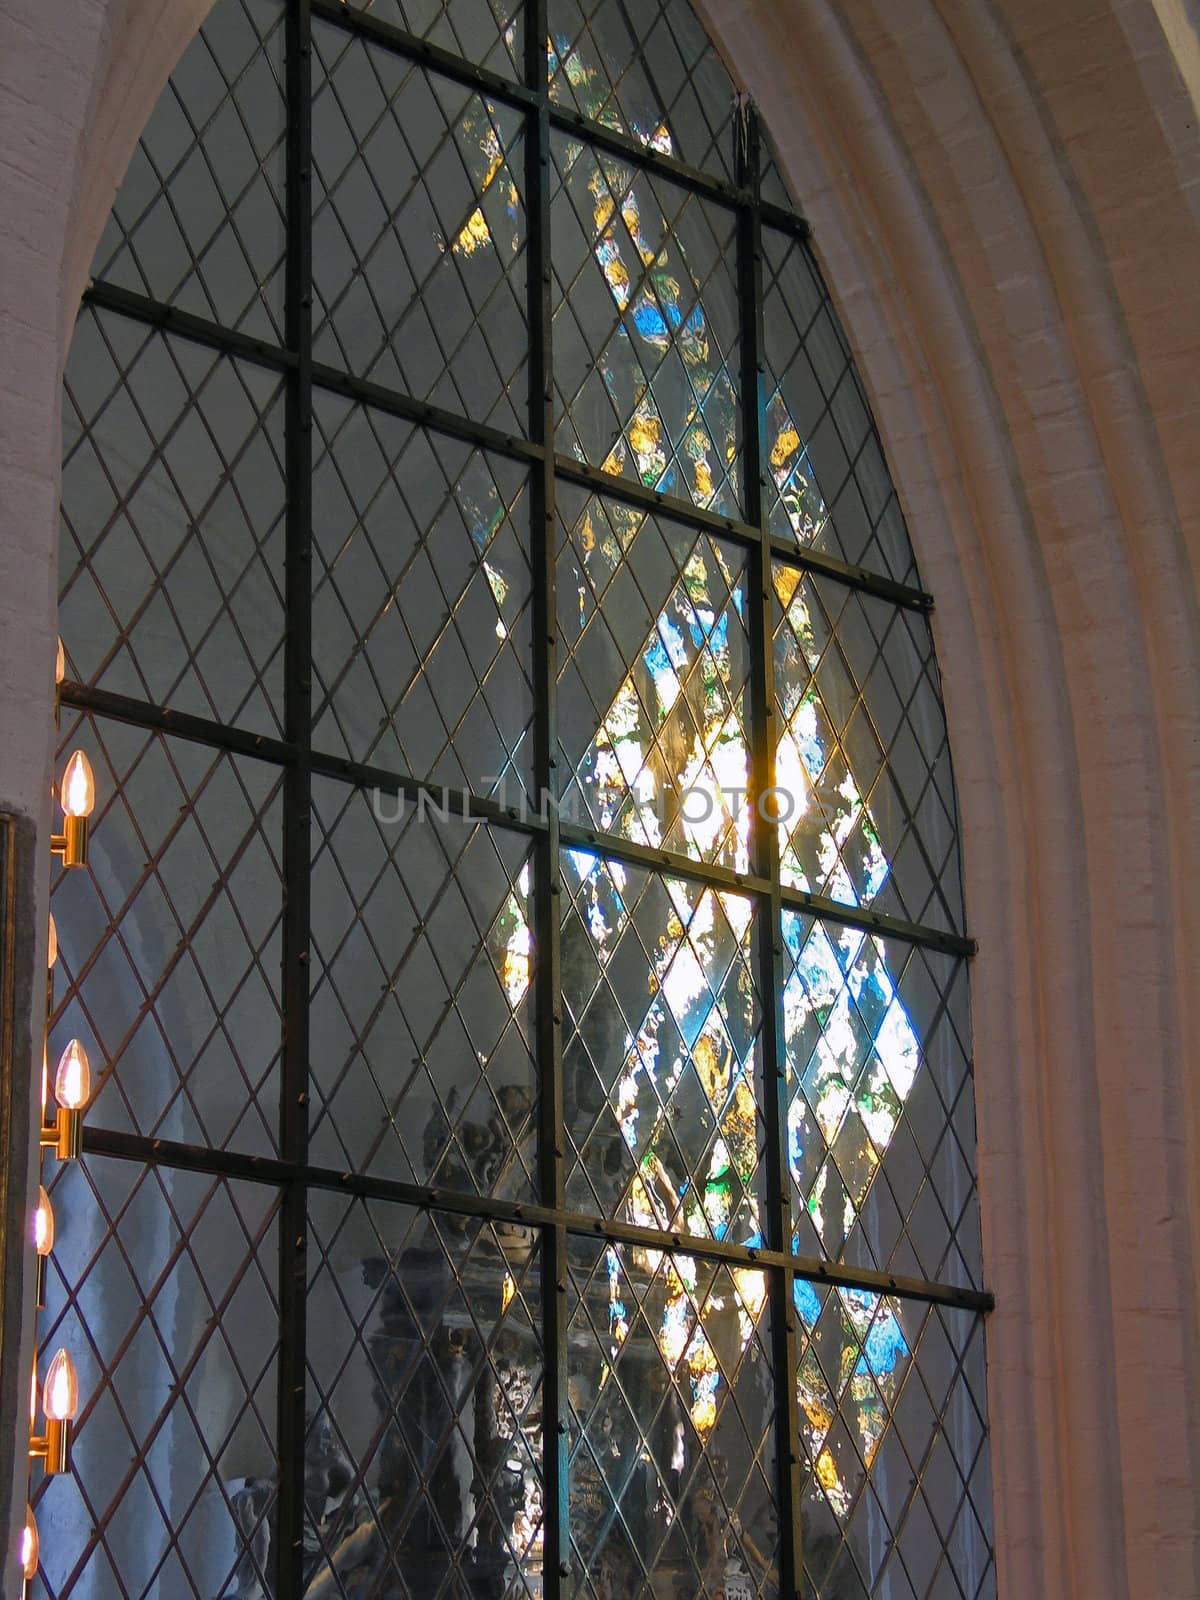 Church Stained Glass Window with Light Reflection